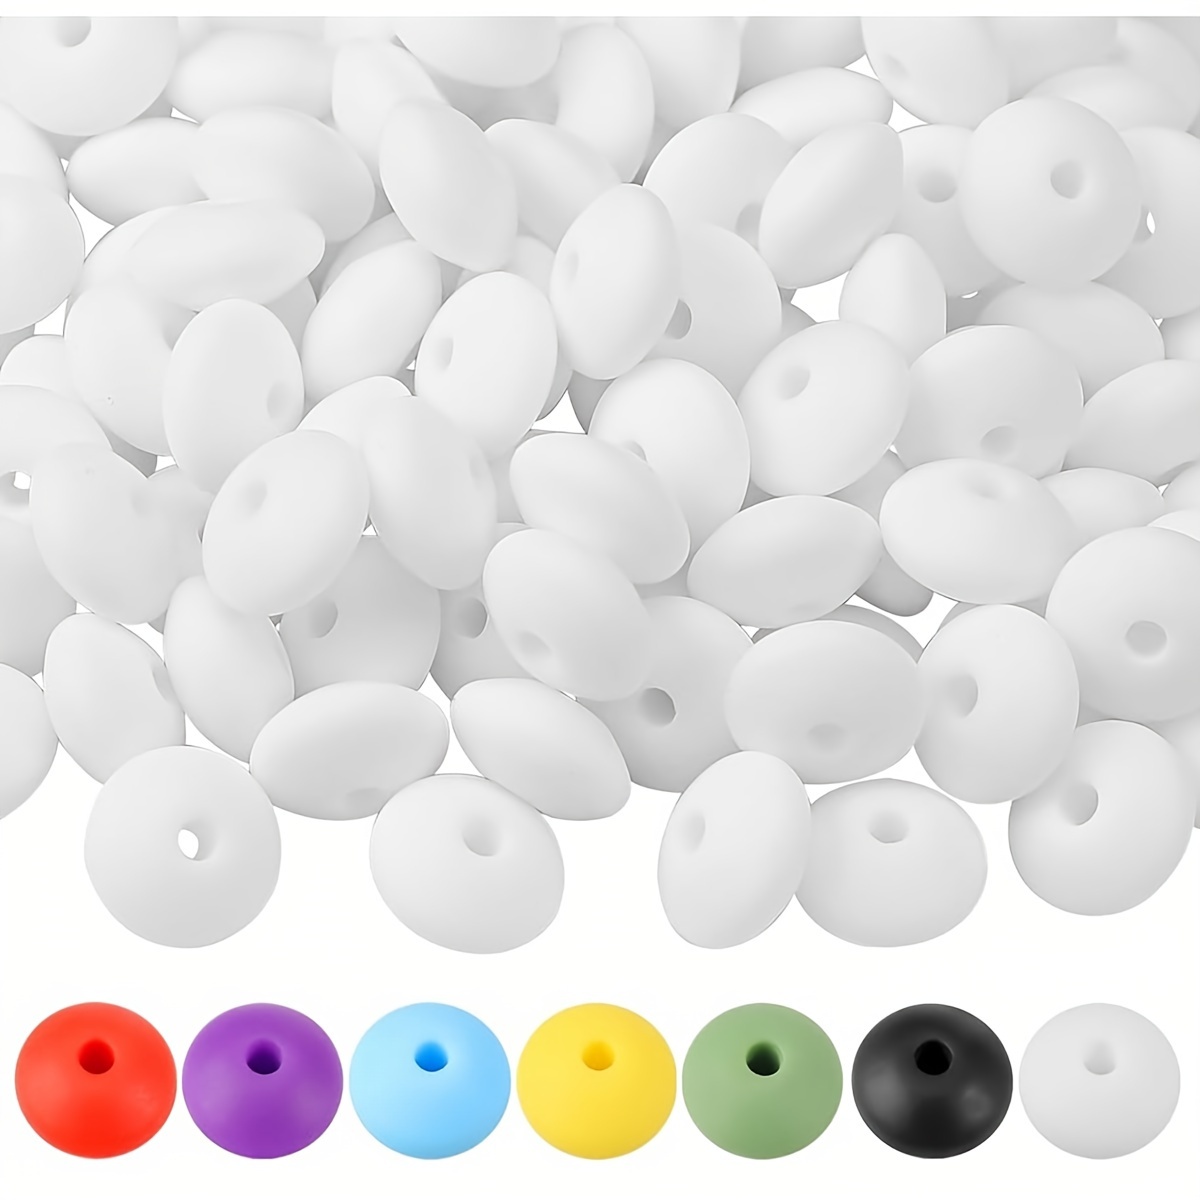 12mm Silicone Beads, 100PCS Silicone Beads Bulk Spacer Beads Focal